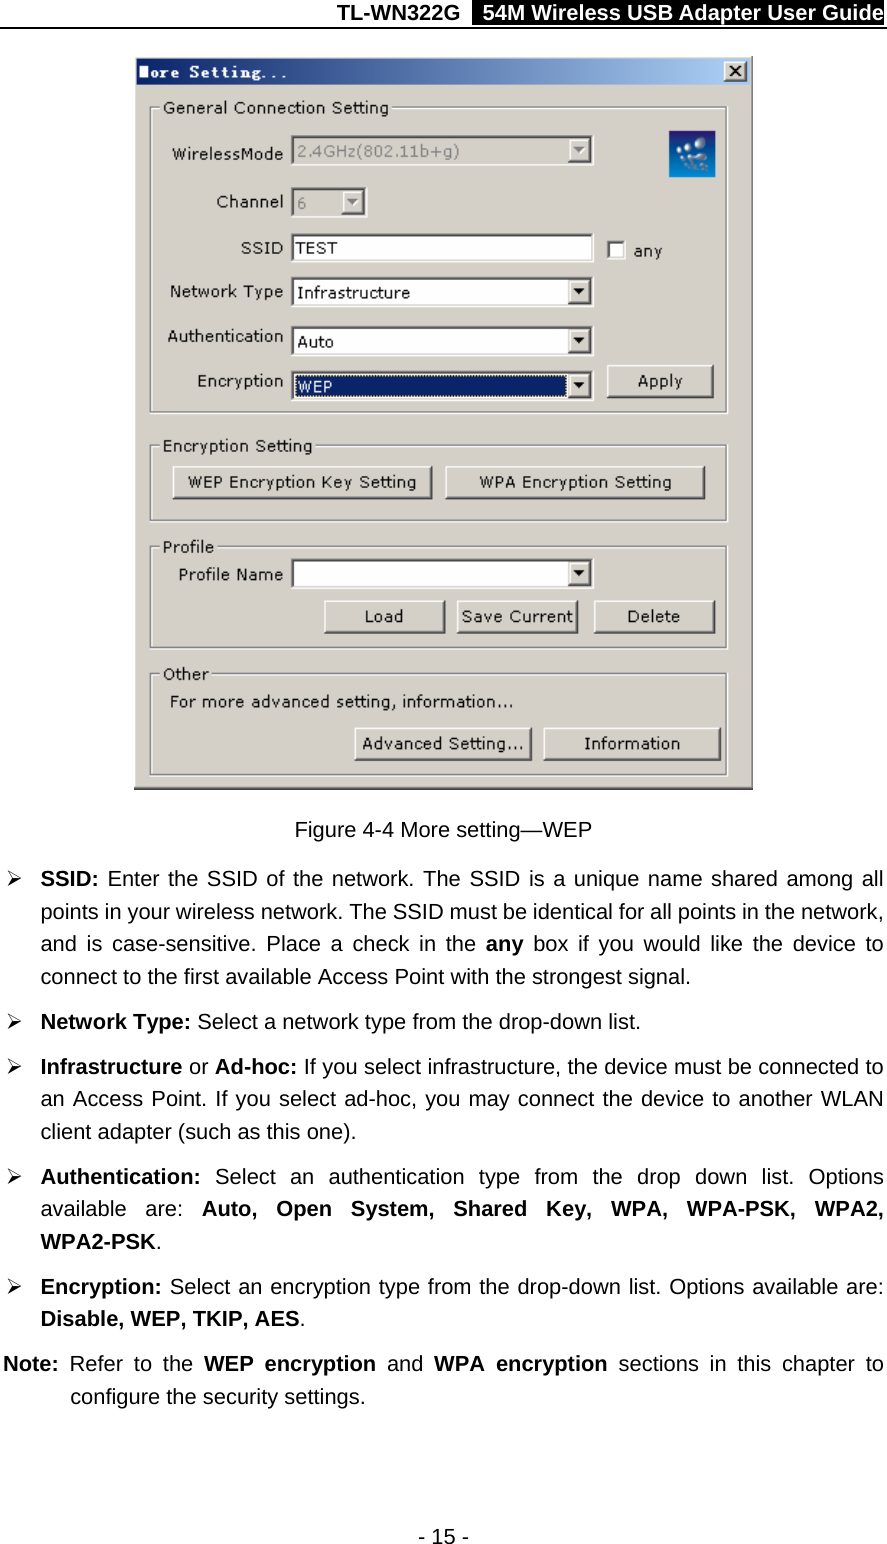 TL-WN322G    54M Wireless USB Adapter User Guide  Figure 4-4 More setting—WEP ¾ SSID: Enter the SSID of the network. The SSID is a unique name shared among all points in your wireless network. The SSID must be identical for all points in the network, and is case-sensitive. Place a check in the any  box if you would like the device to connect to the first available Access Point with the strongest signal. ¾ Network Type: Select a network type from the drop-down list. ¾ Infrastructure or Ad-hoc: If you select infrastructure, the device must be connected to an Access Point. If you select ad-hoc, you may connect the device to another WLAN client adapter (such as this one). ¾ Authentication:  Select an authentication type from the drop down list. Options available are: Auto, Open System, Shared Key, WPA, WPA-PSK, WPA2, WPA2-PSK. ¾ Encryption: Select an encryption type from the drop-down list. Options available are: Disable, WEP, TKIP, AES. Note:  Refer to the WEP encryption and  WPA encryption sections in this chapter to configure the security settings. - 15 - 